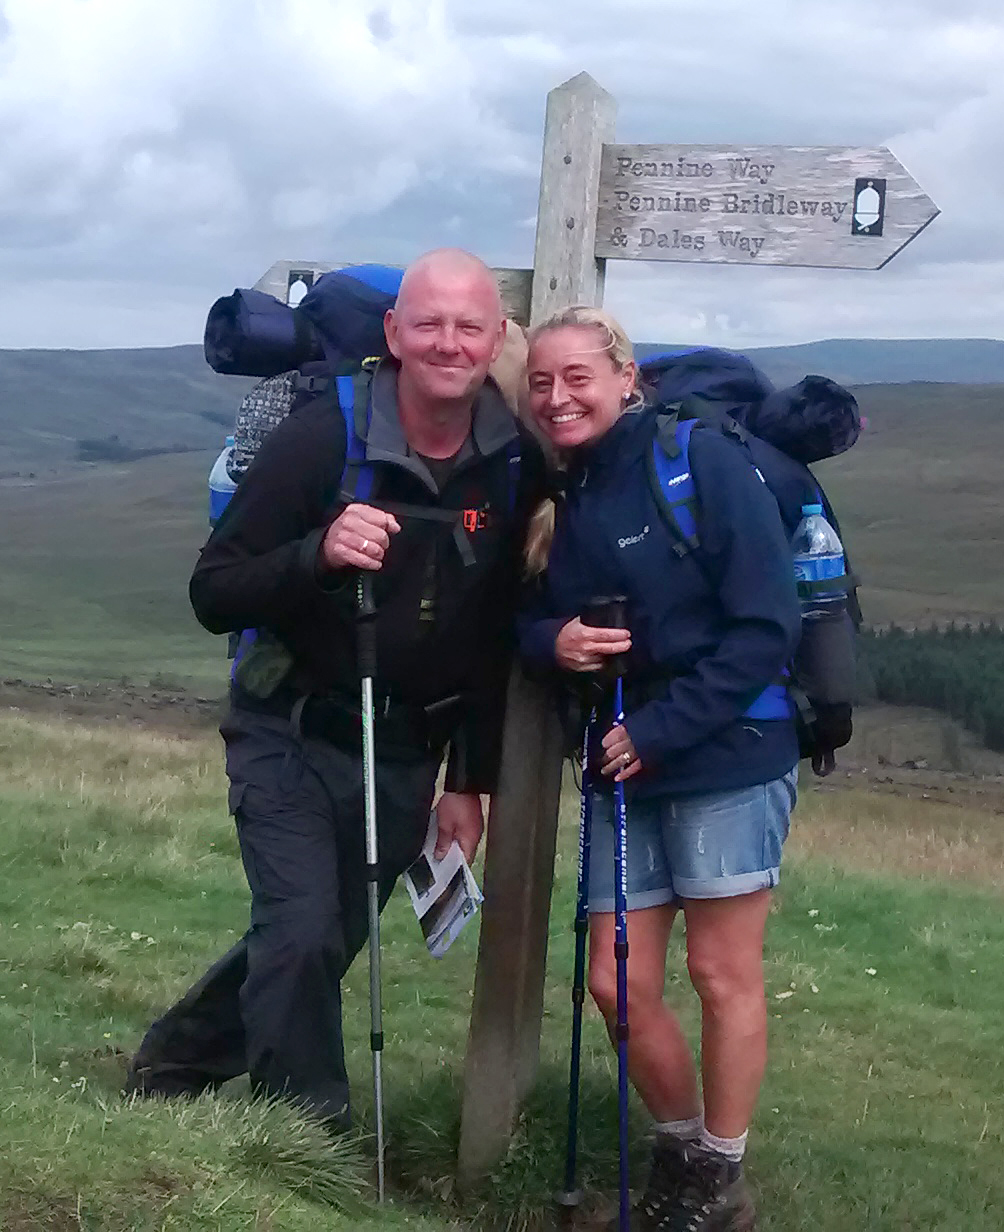 Aycliffe Couple Walk 80 Miles to Help Air Ambulance